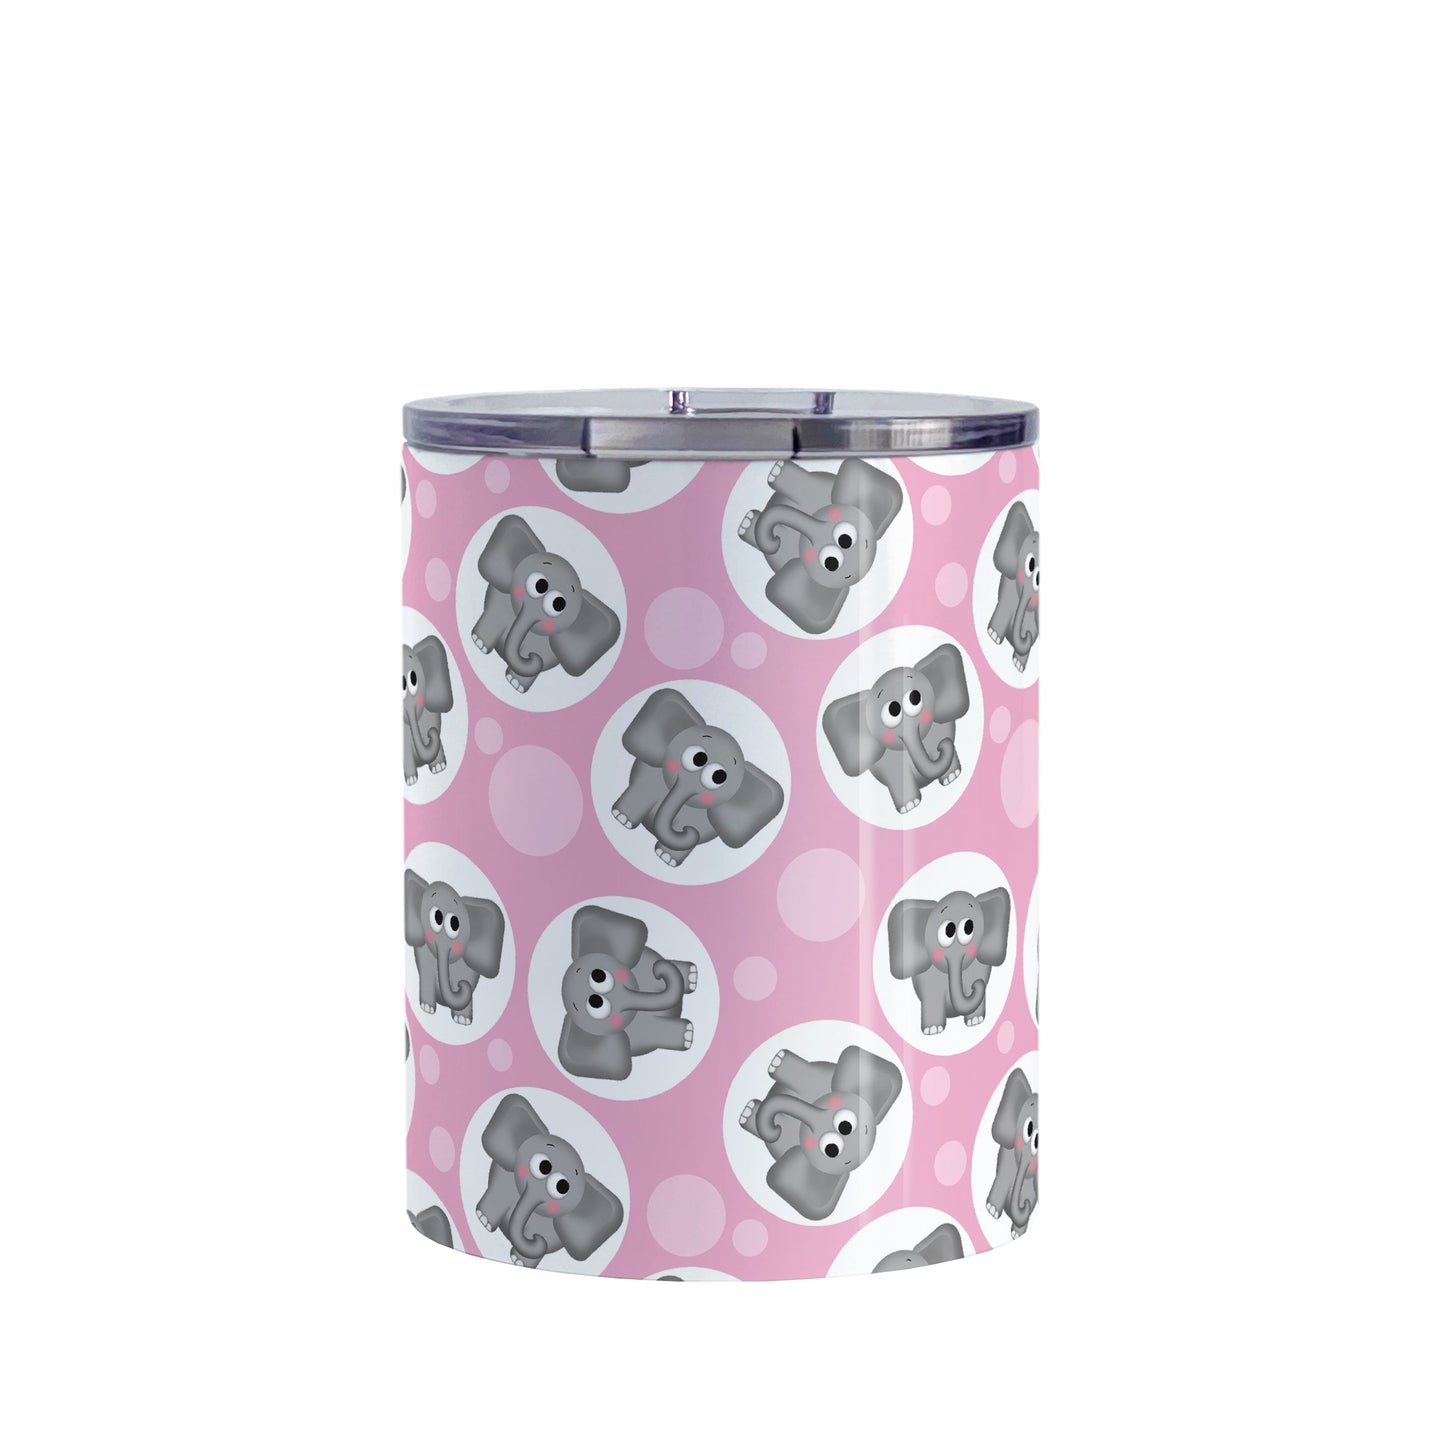 Cute Pink Elephant Pattern Tumbler Cup (10oz, stainless steel insulated) at Amy's Coffee Mugs